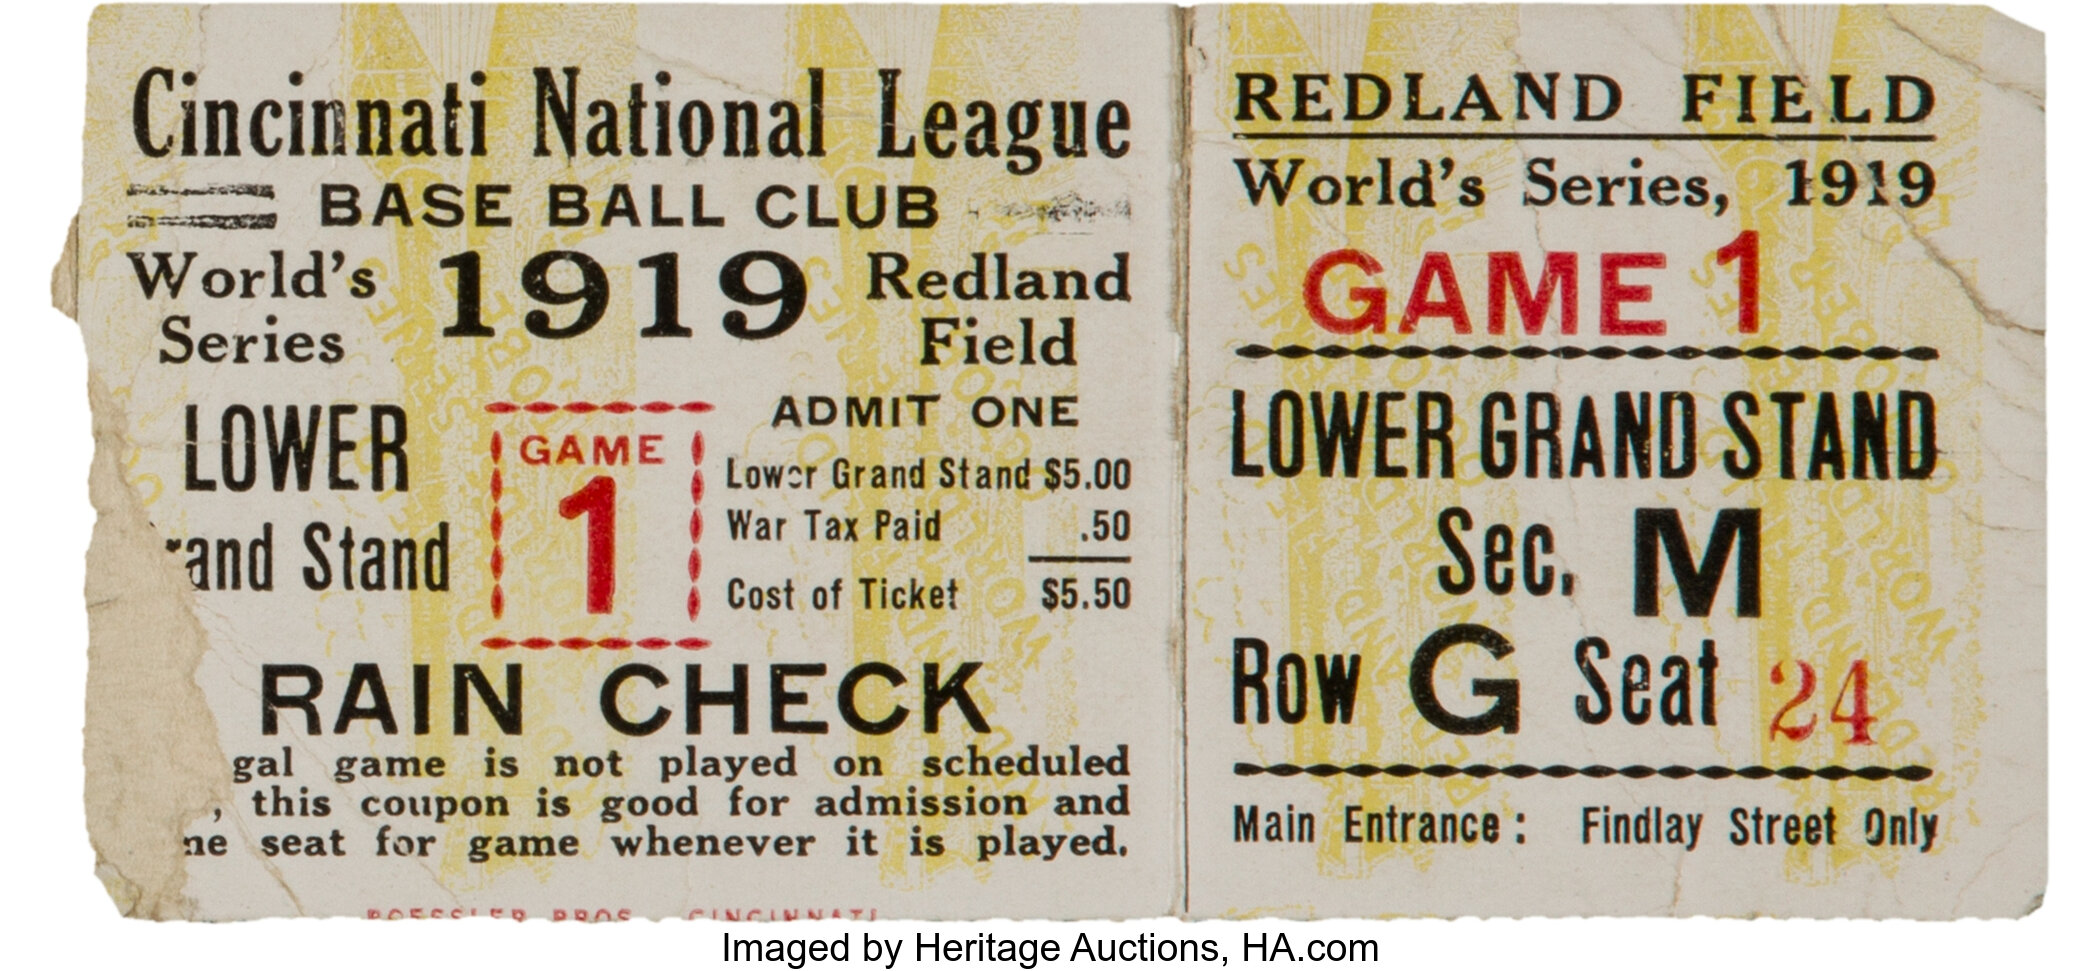 1919 World Series Game One Ticket Stub. Baseball Collectibles